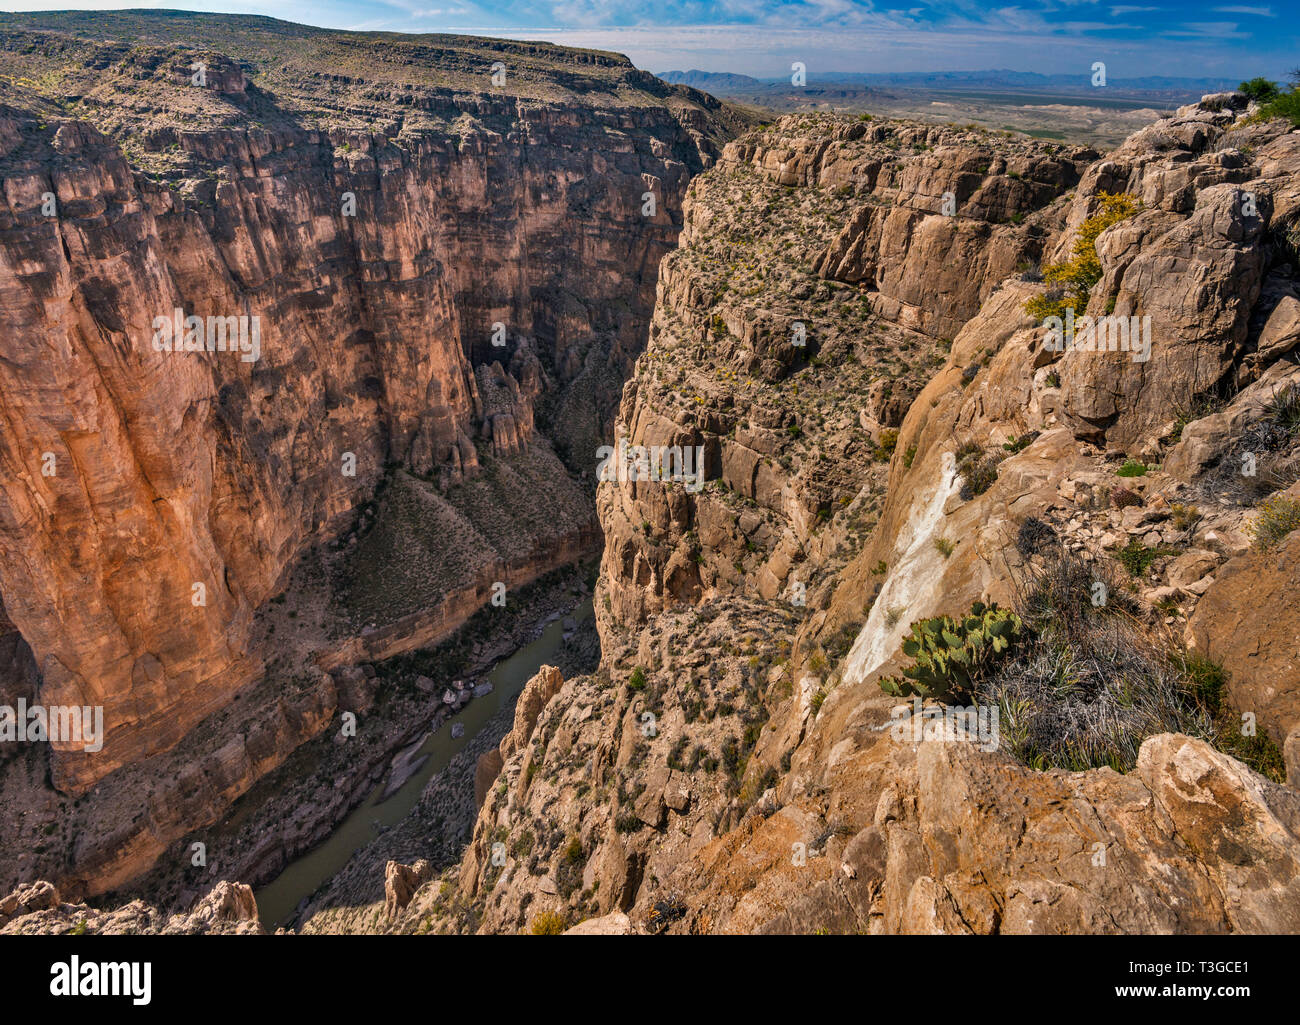 Mariscal Canyon, Rio Grande, Tight Squeeze Rapids area, view from Rim Trail, Big Bend National Park, Texas, USA Stock Photo